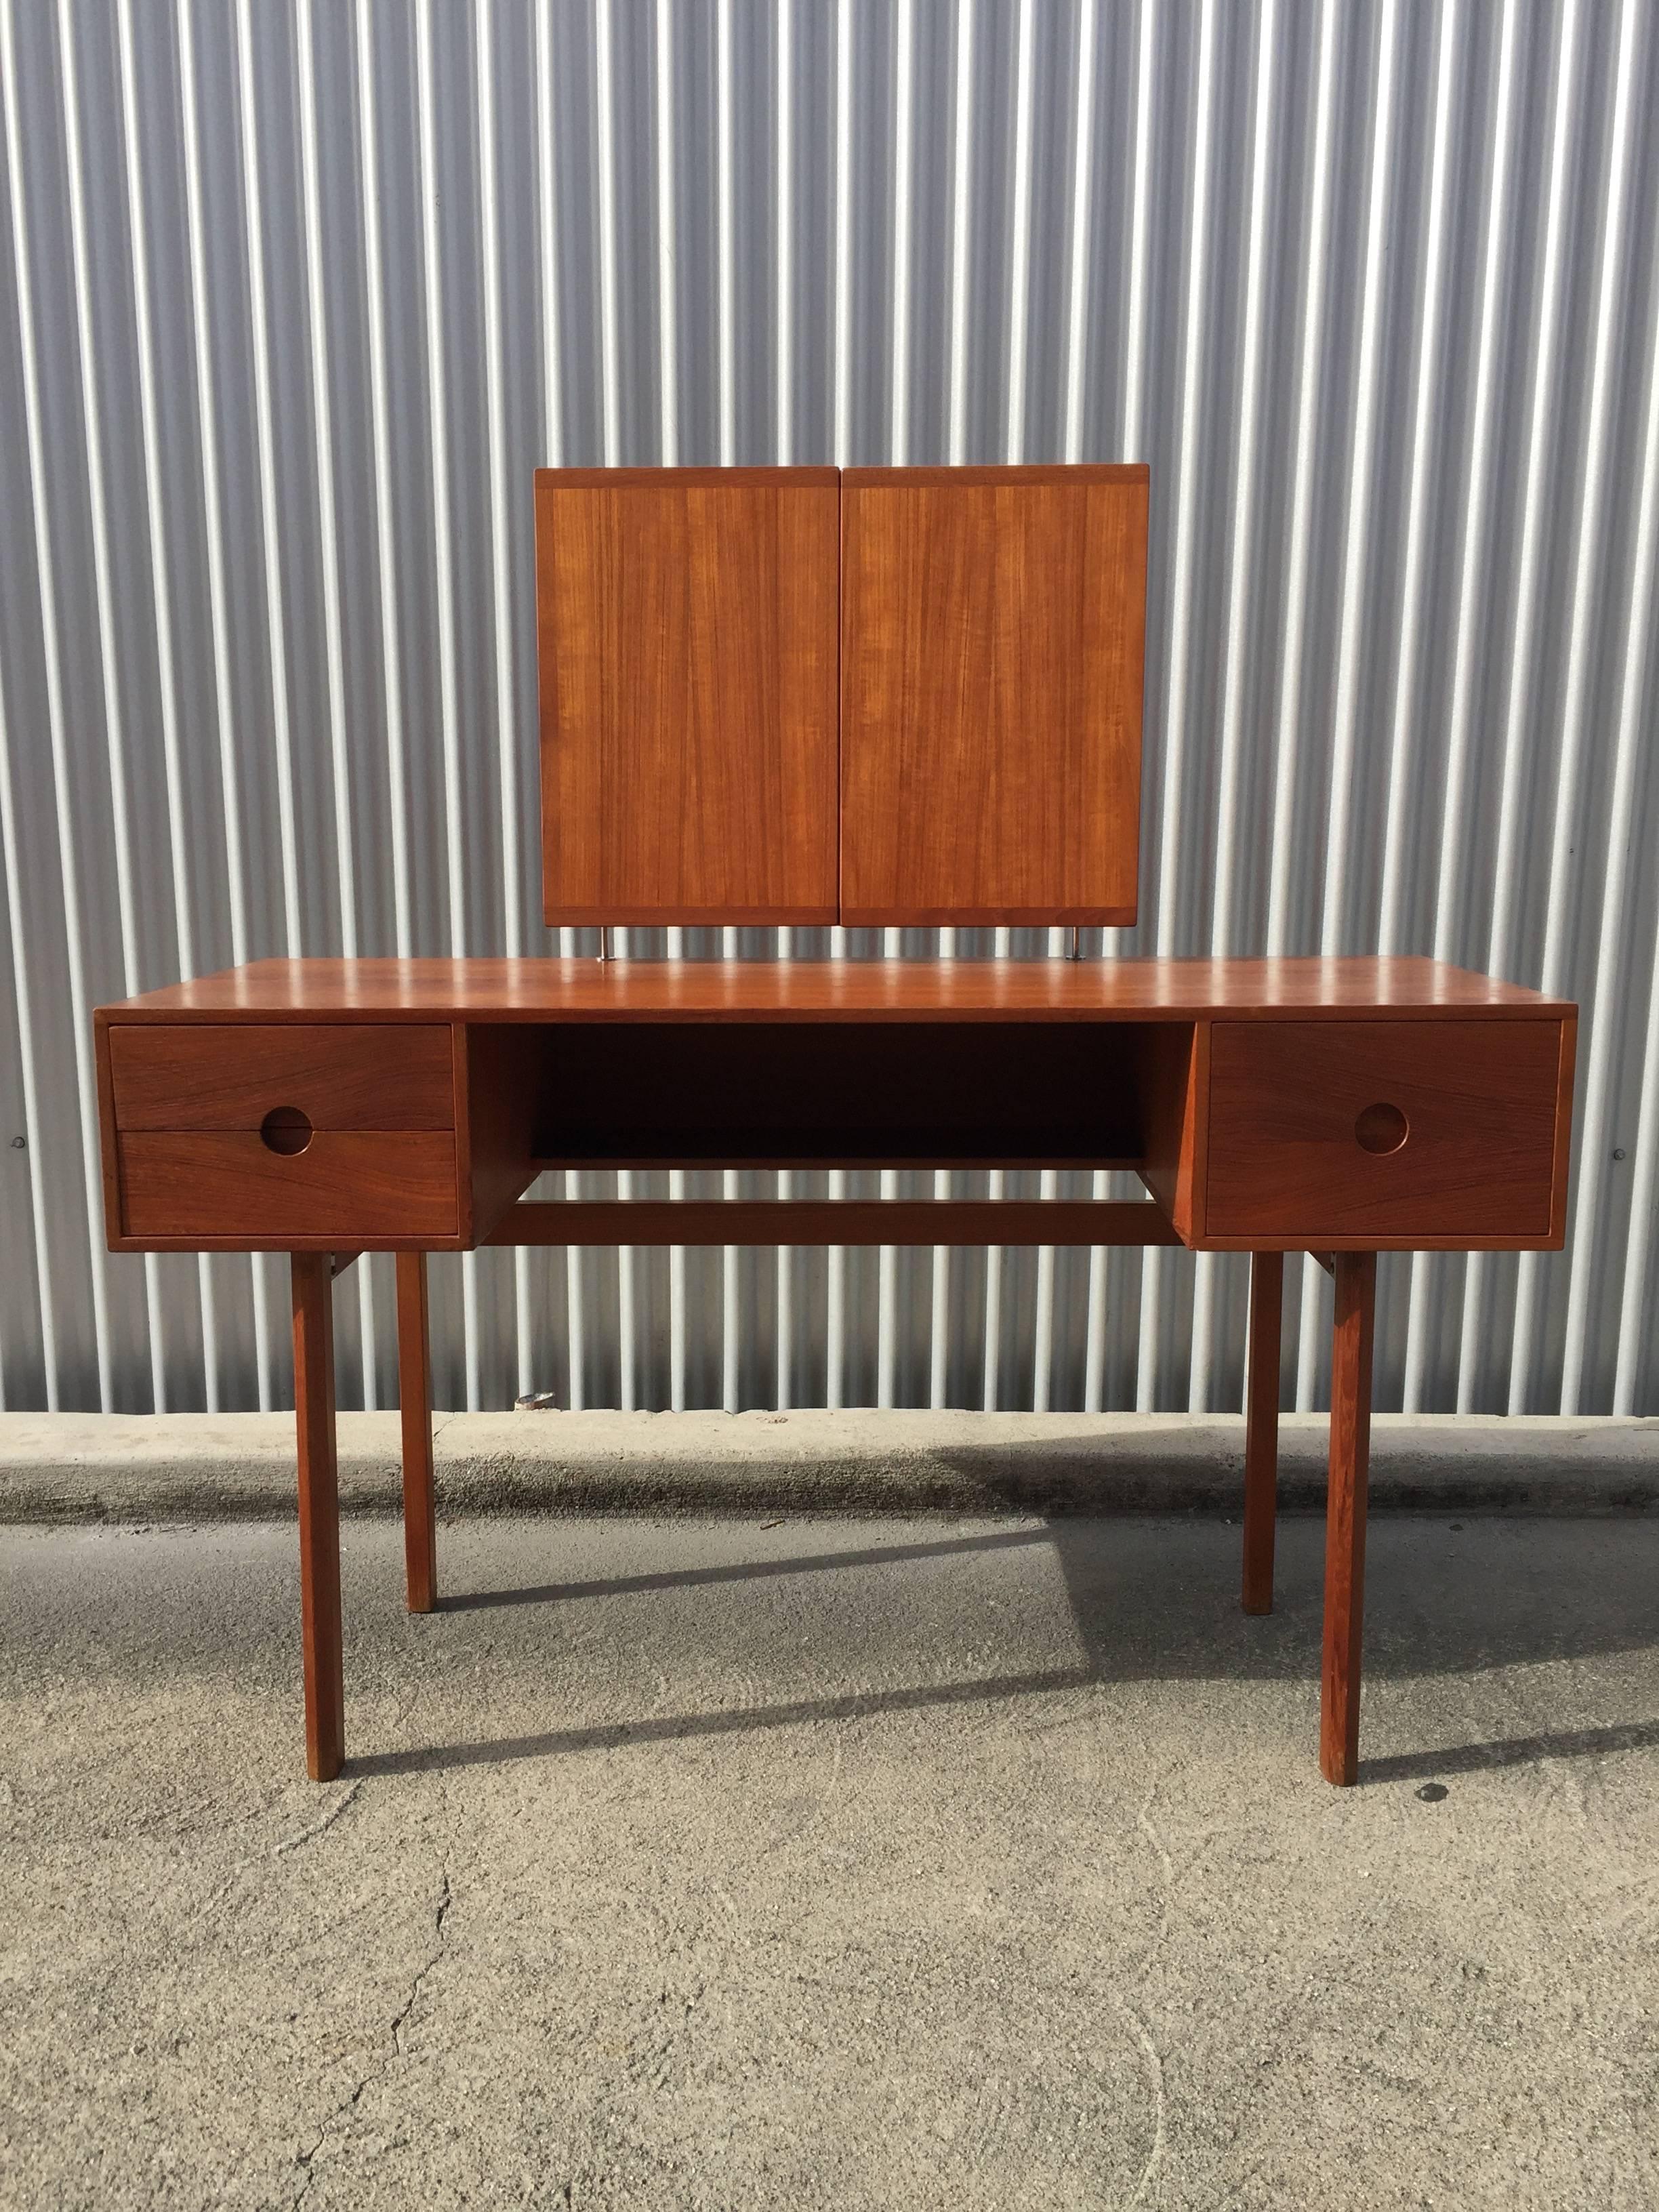 Manufactured by Odder, Denmark. Vanity with adjustable, folding, and floating mirror. Teak. Mint original condition.